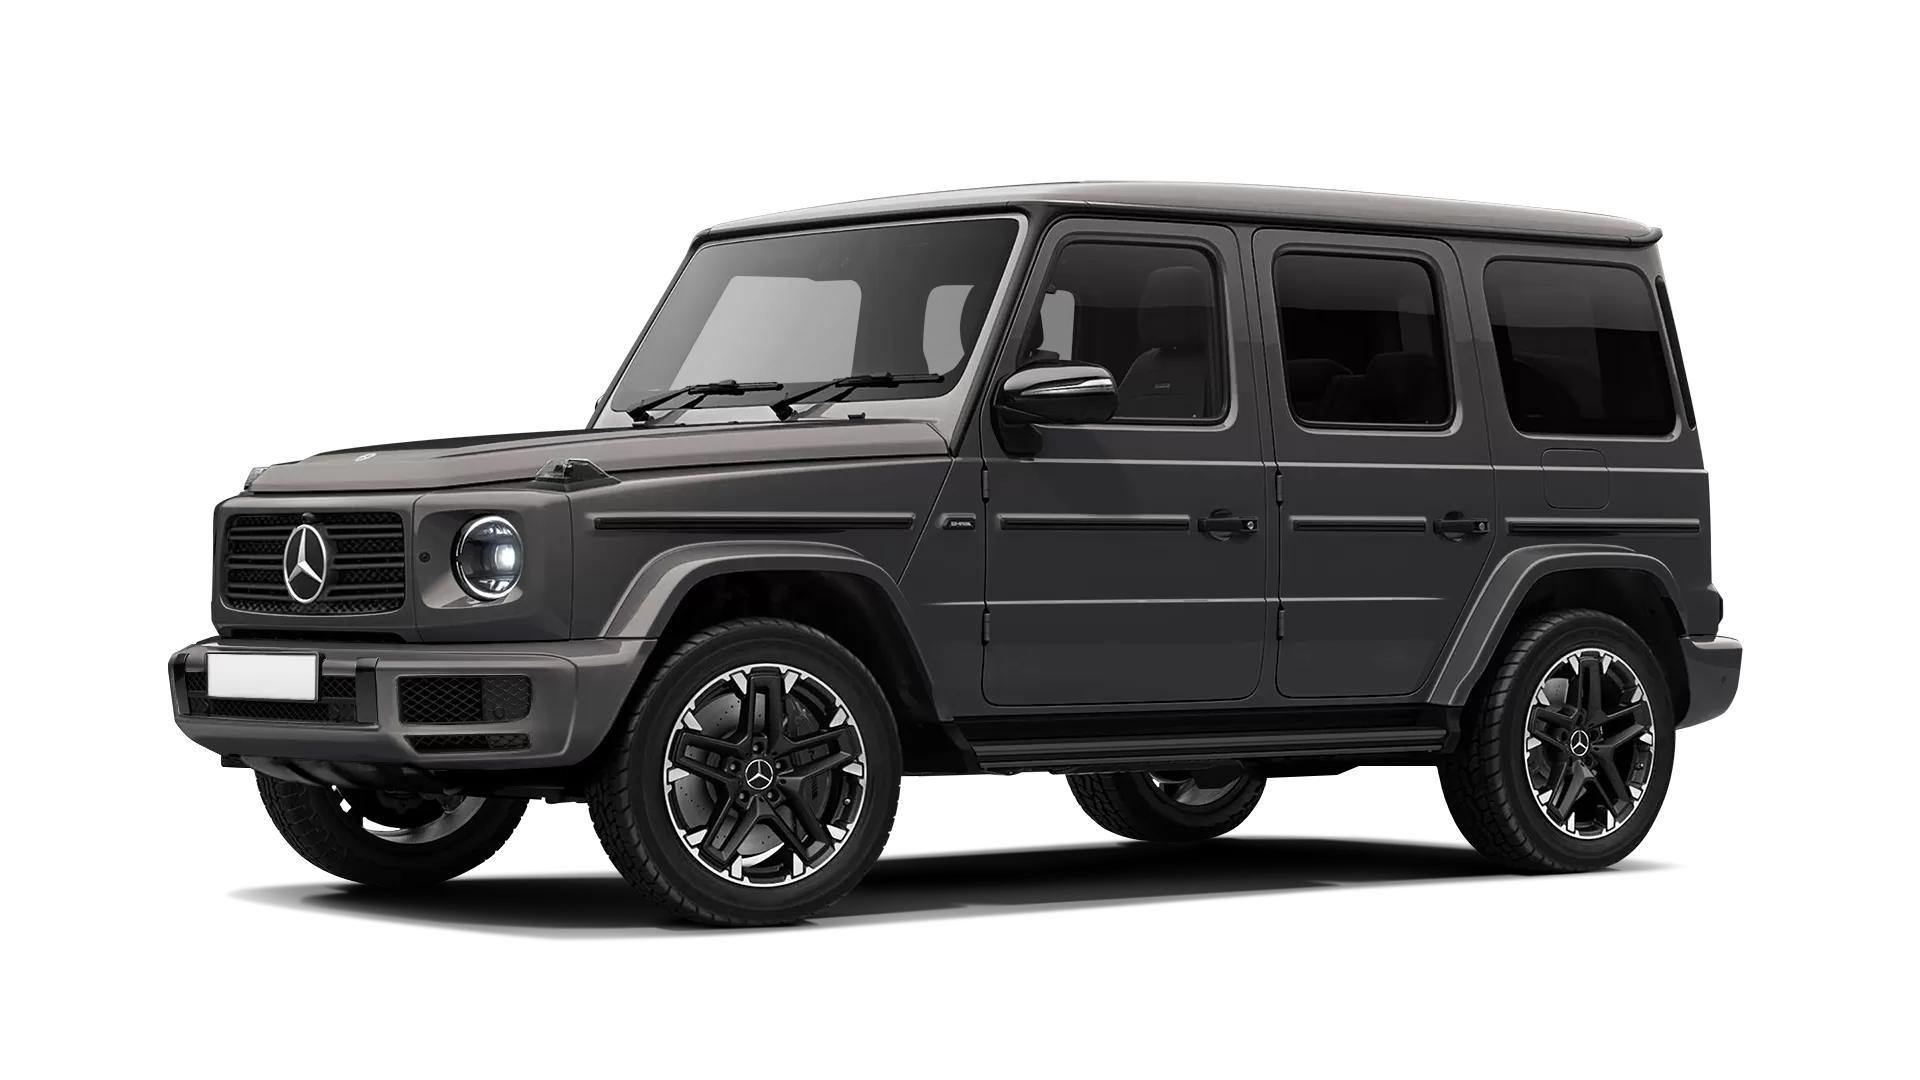 Mercedes G class W463 stock front view in Indium Grey color